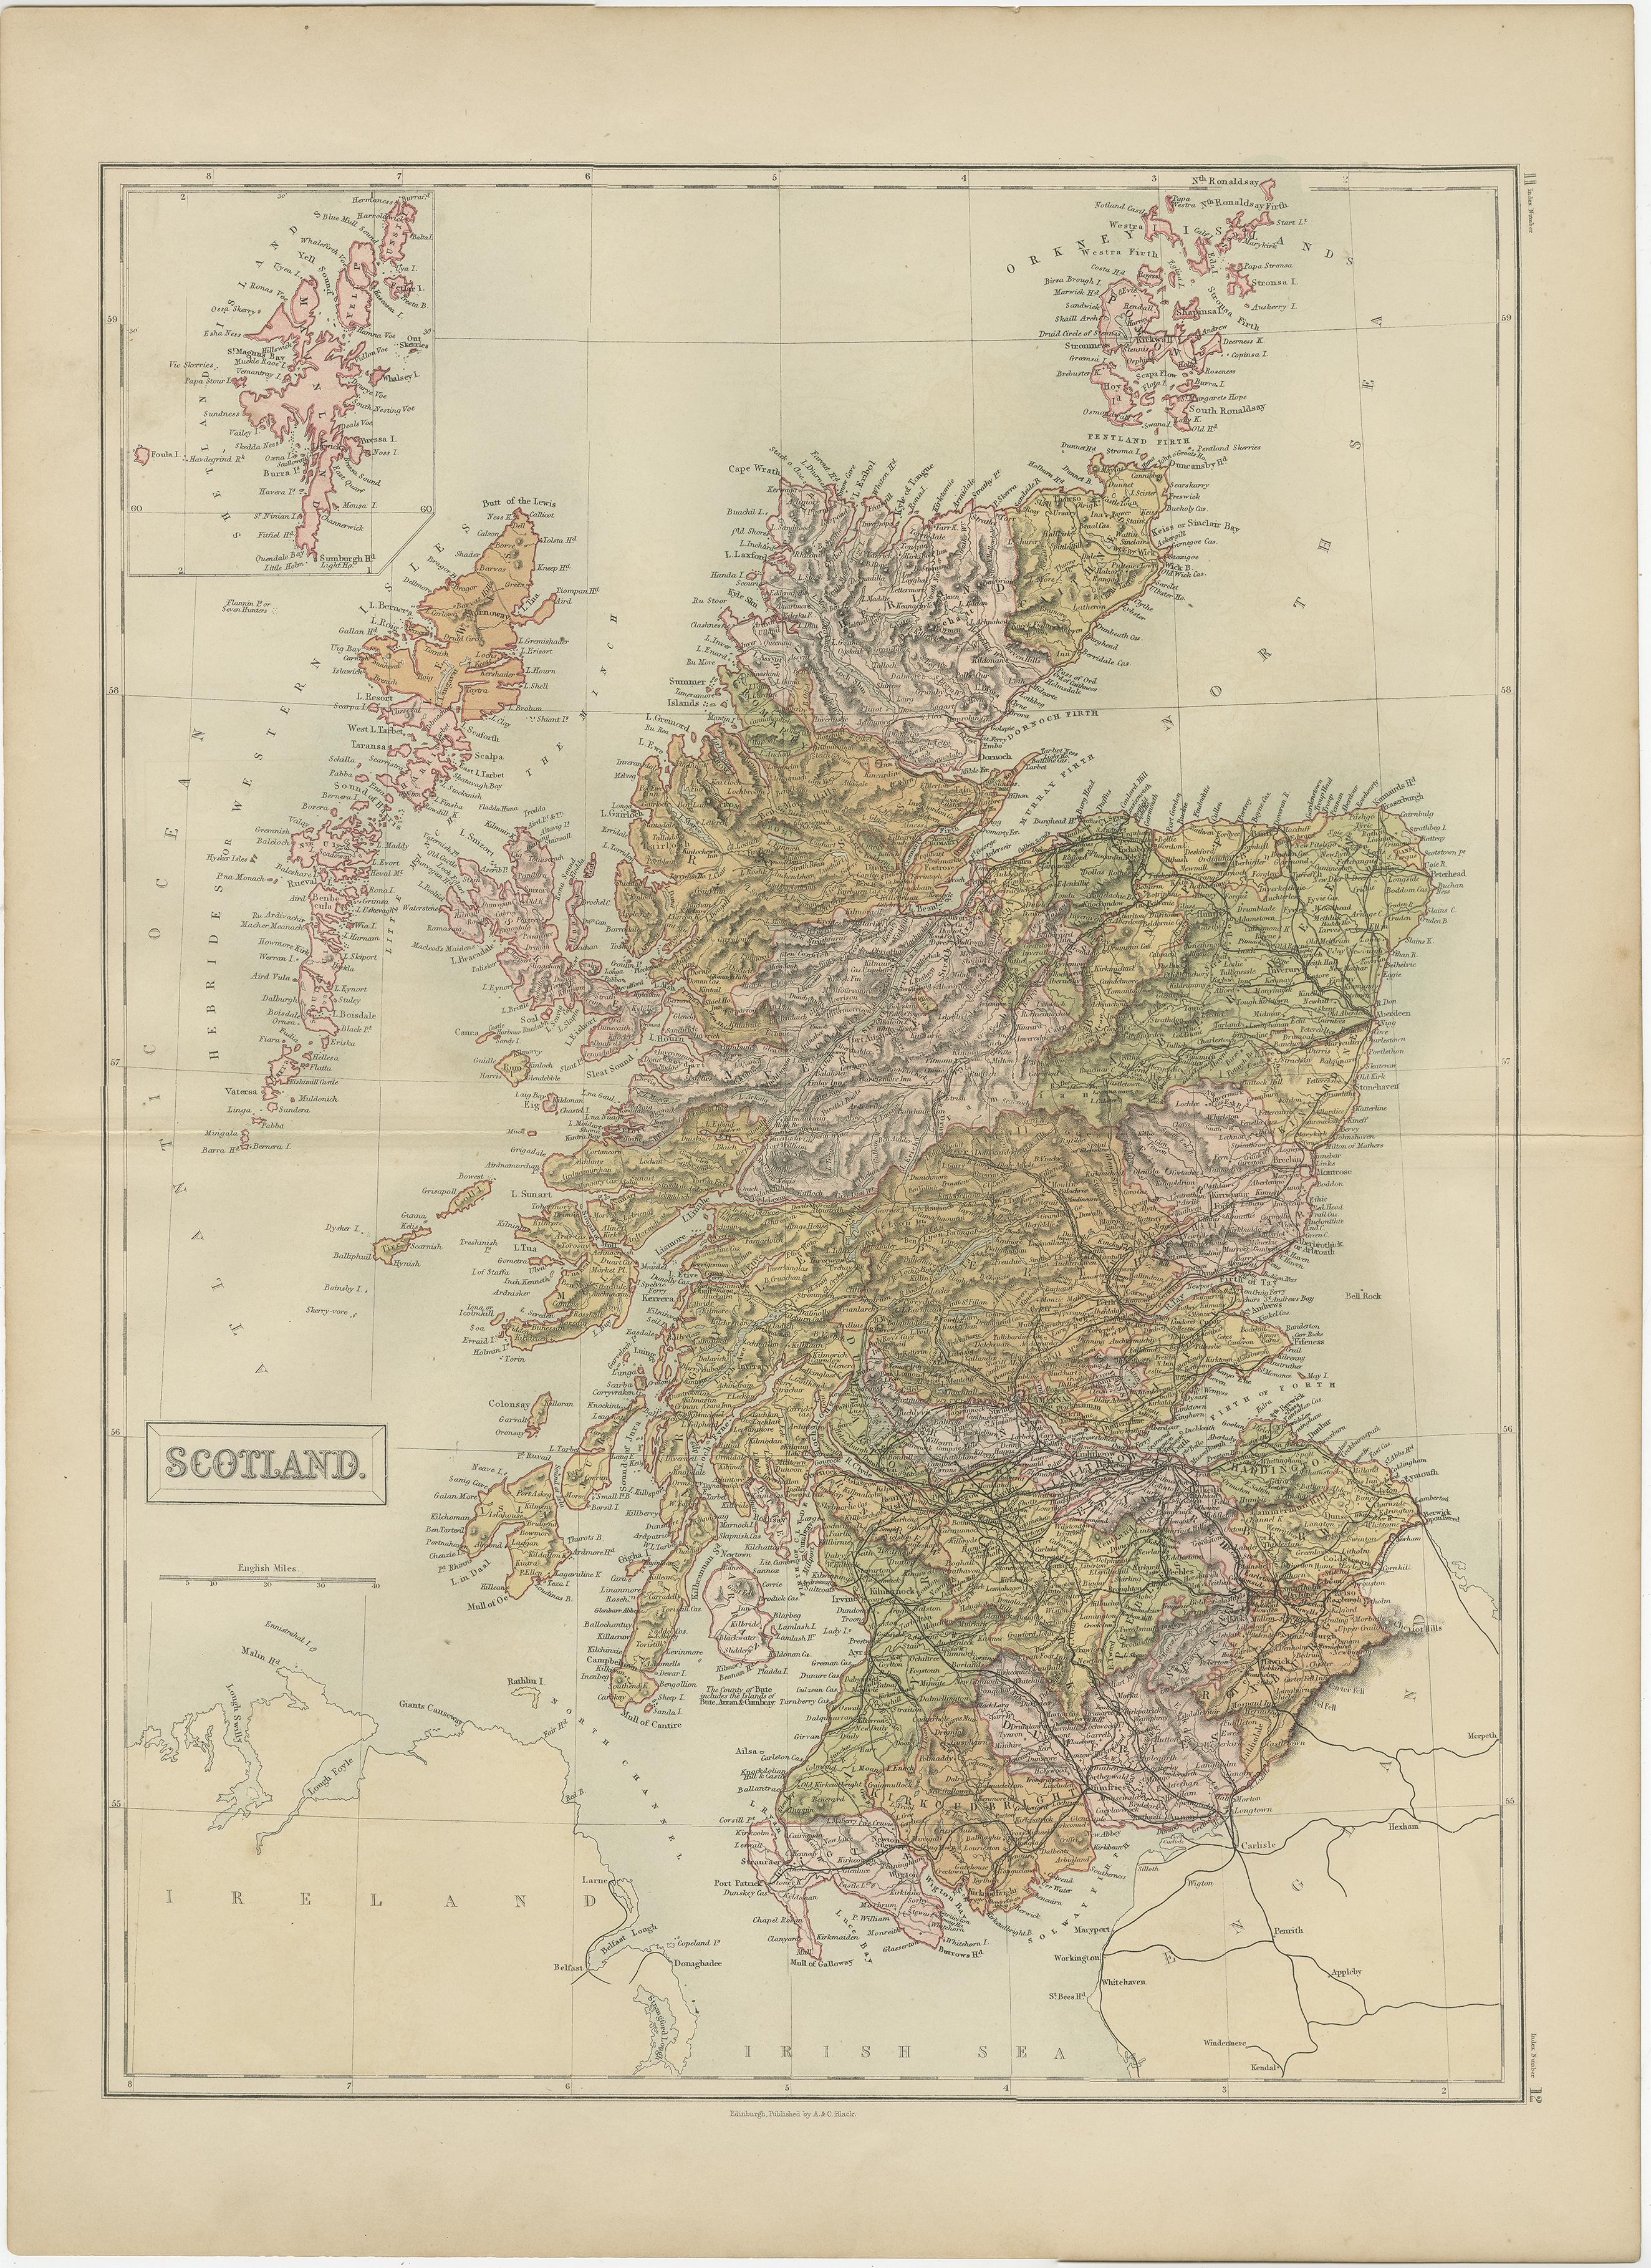 Antique map titled 'Scotland'. Original antique map of Scotland with inset map of Shetland island. This map originates from ‘Black's General Atlas of The World’. Published by A & C. Black, 1870.